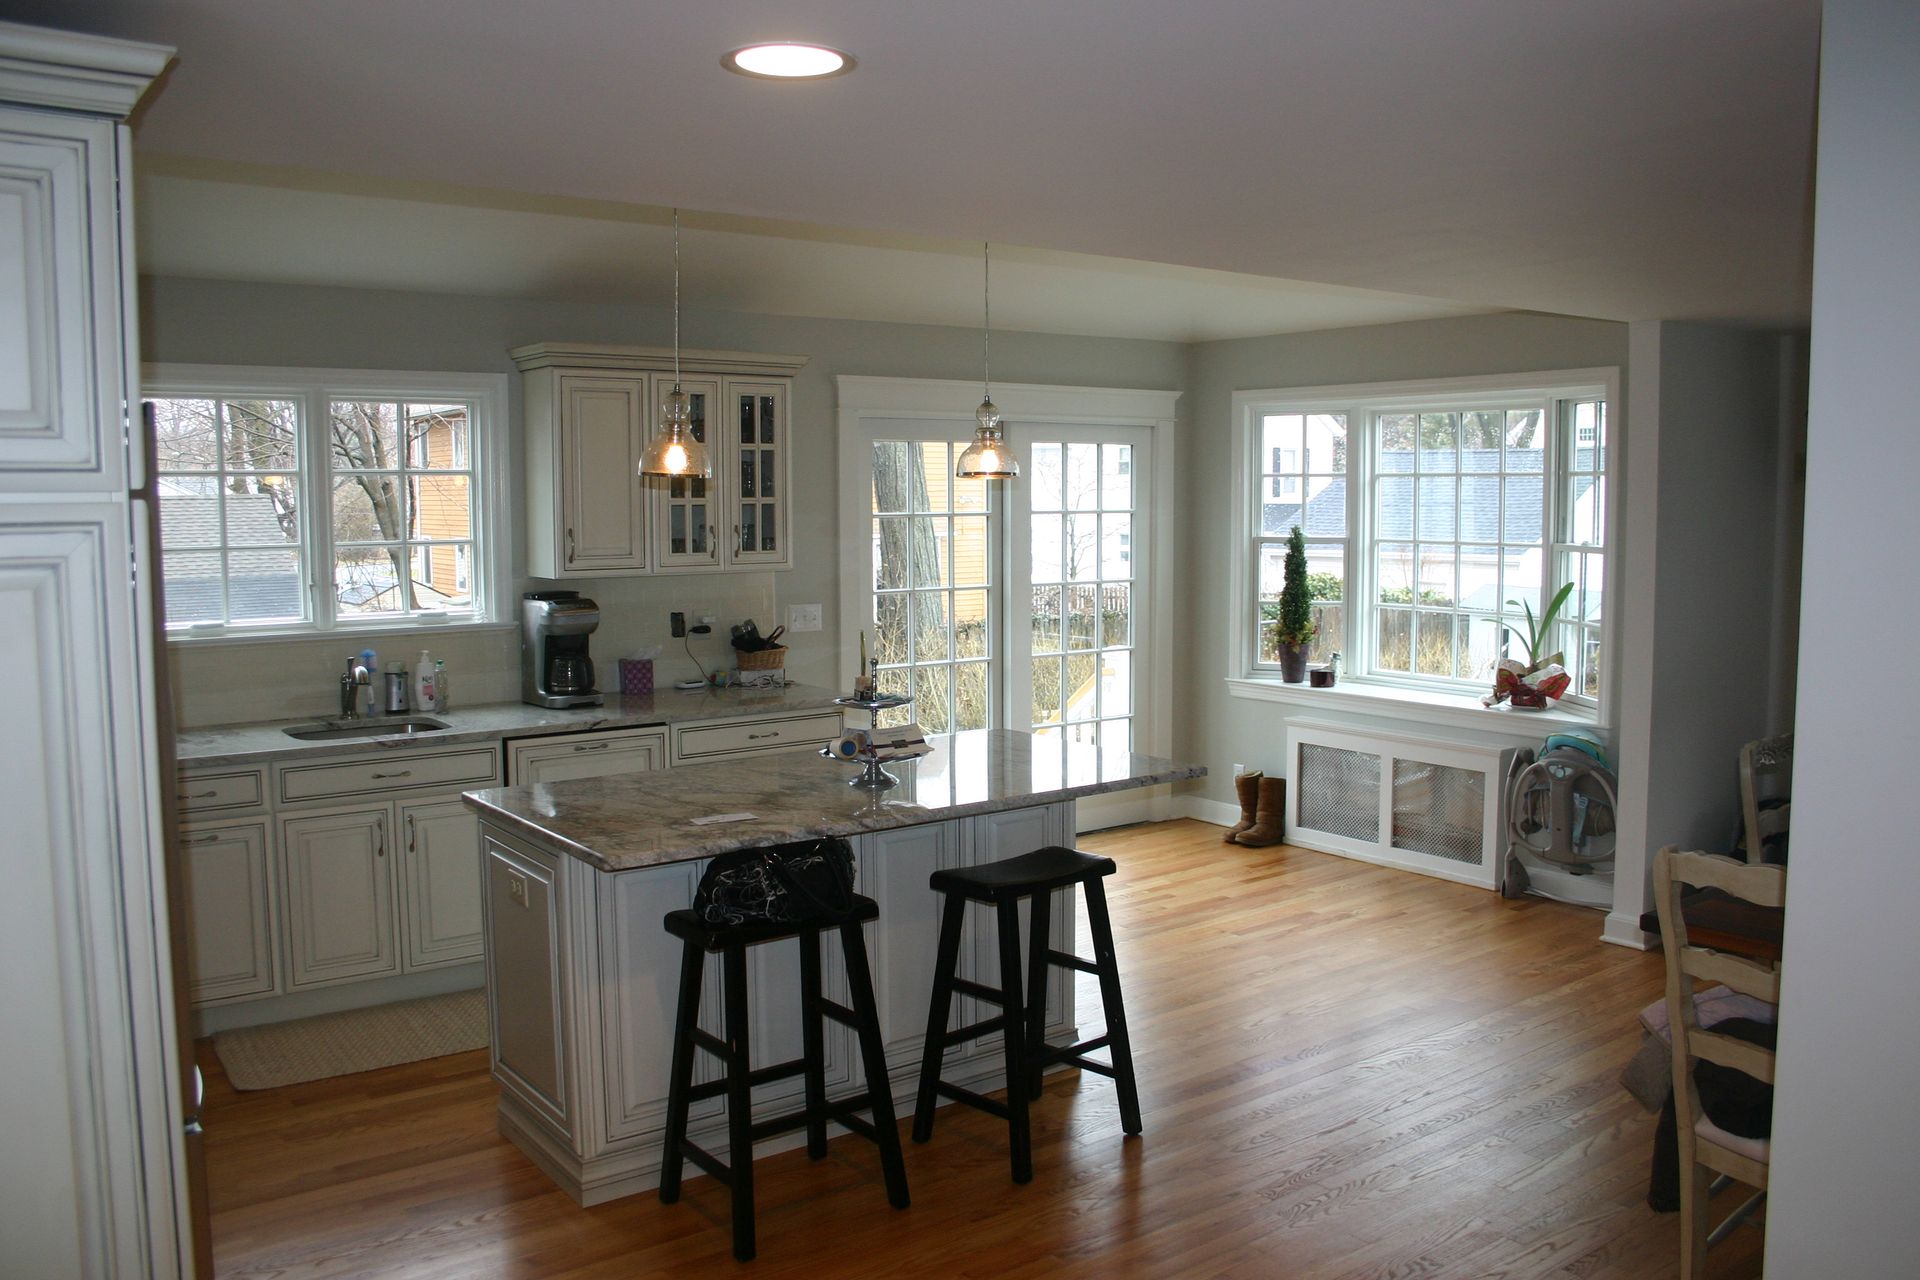 A kitchen with white cabinets and hardwood floors and stools